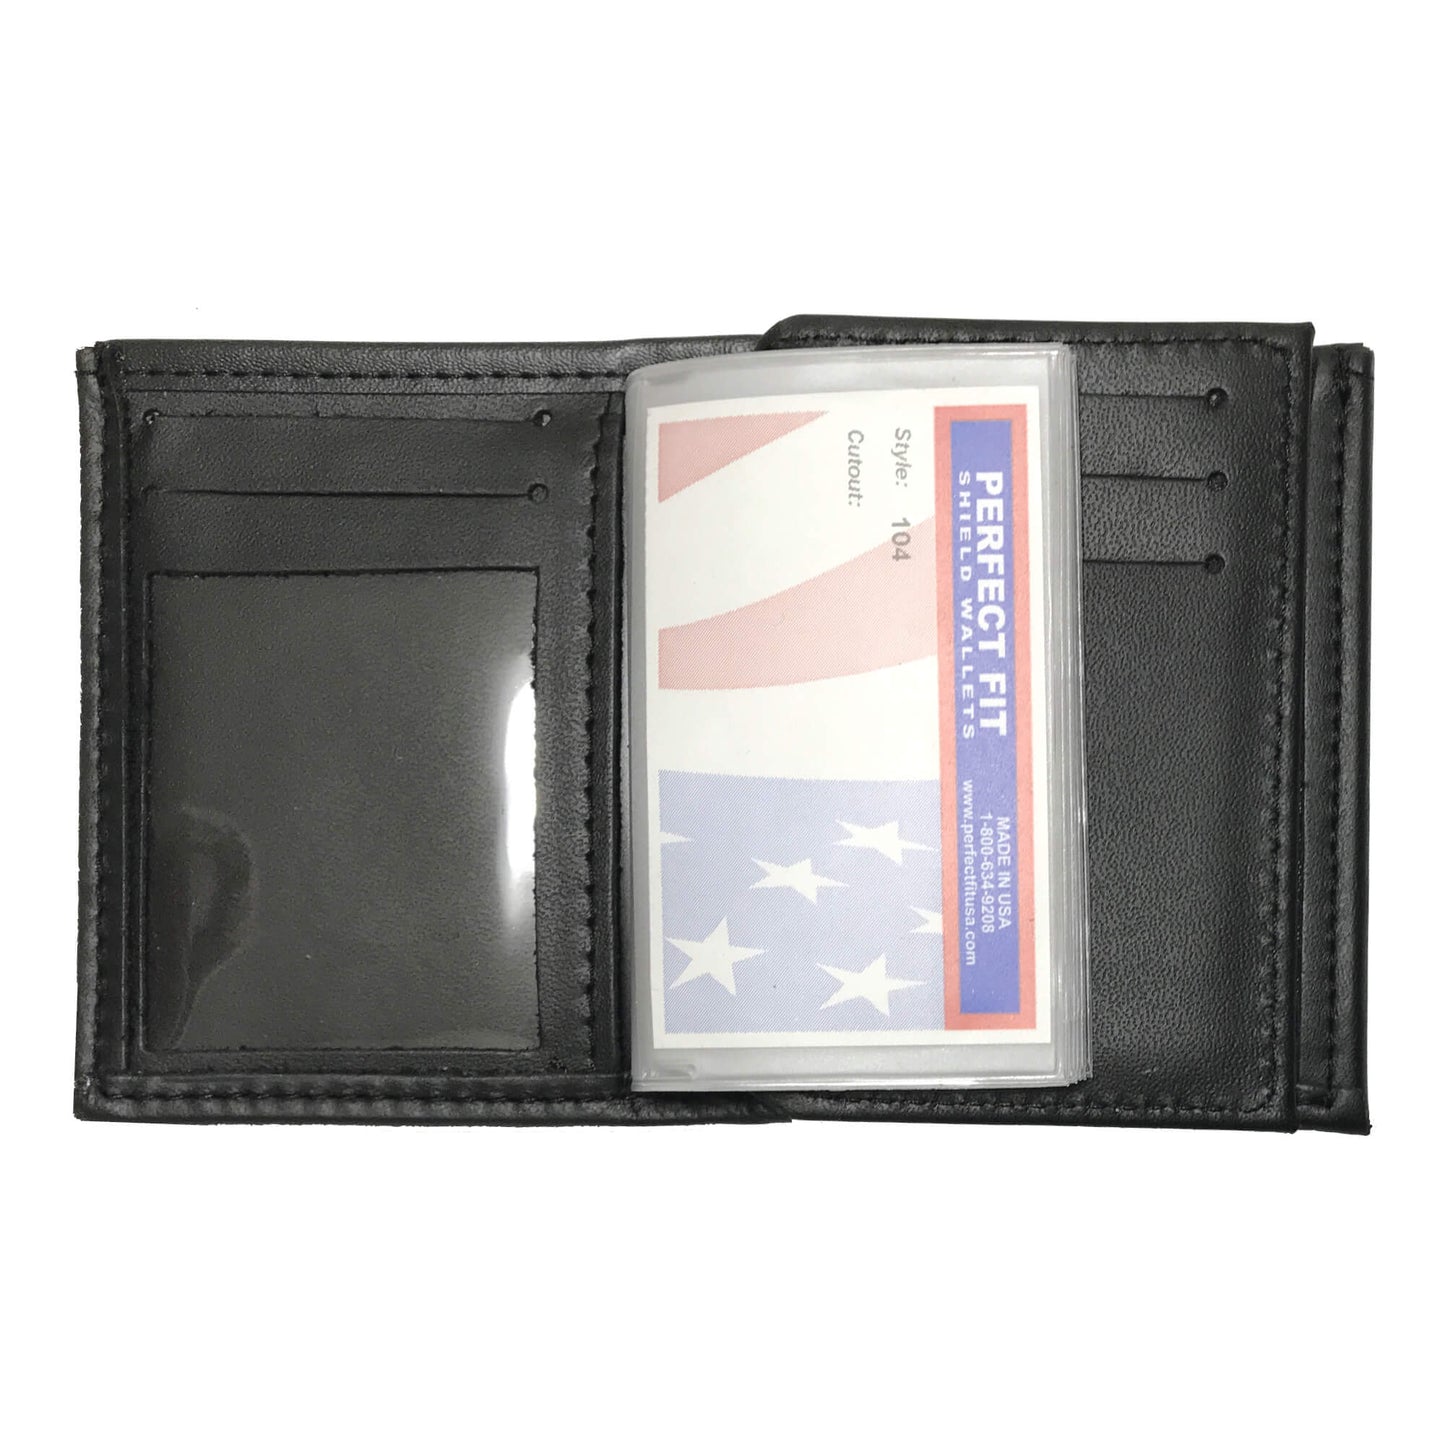 U.S. Federal Courts Bifold Hidden Badge Wallet-Perfect Fit-911 Duty Gear USA